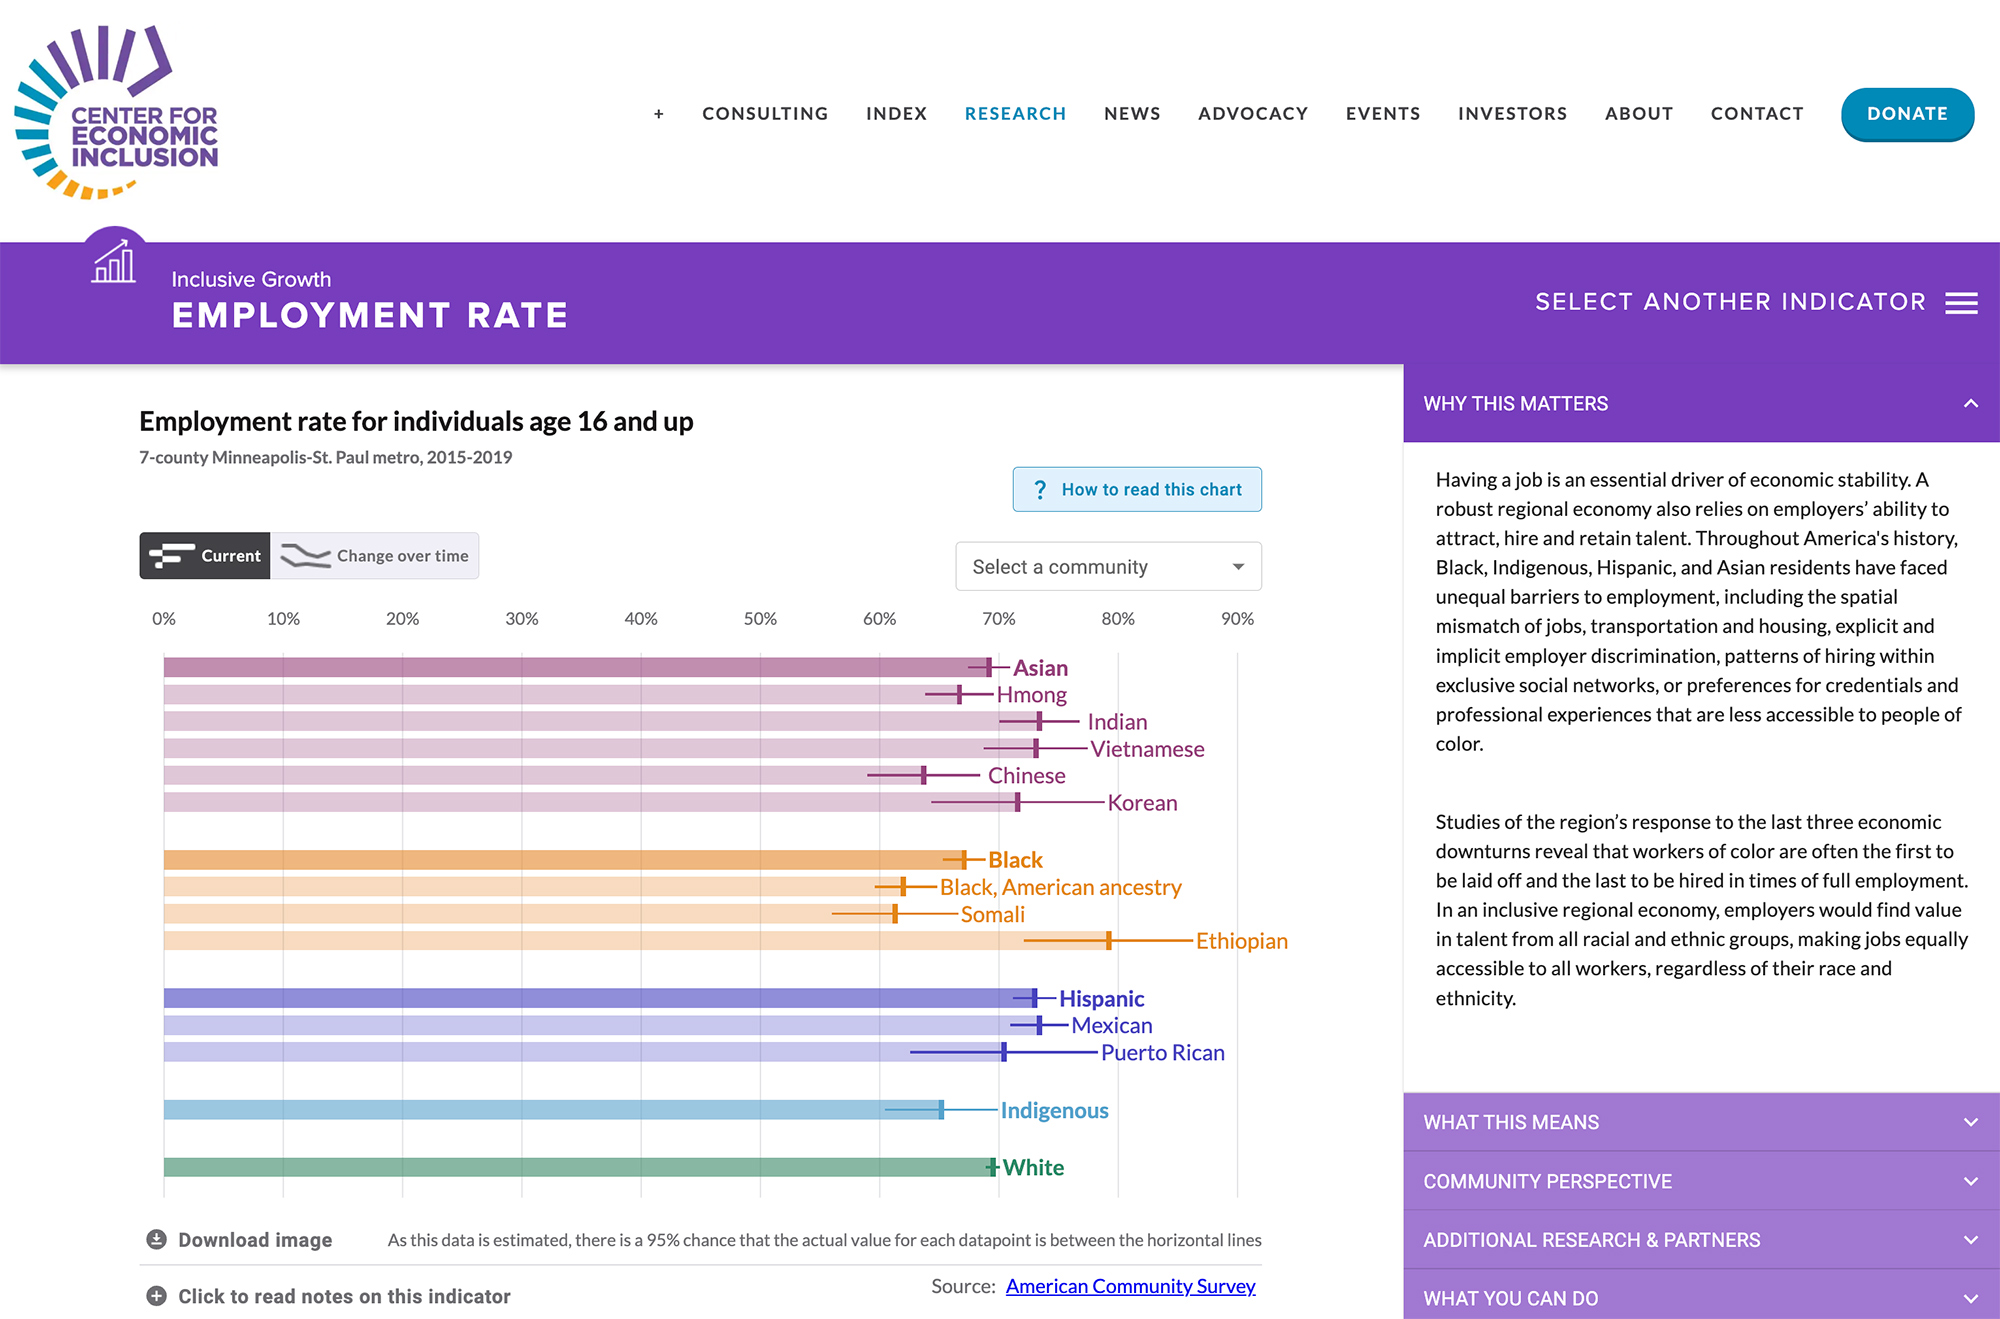 The main view for the Indicators for an Inclusive Regional Economy website, showing a bar chart for employment rates, disaggregated by race and ethnicity, for the Minneapolis/Twin cities area.